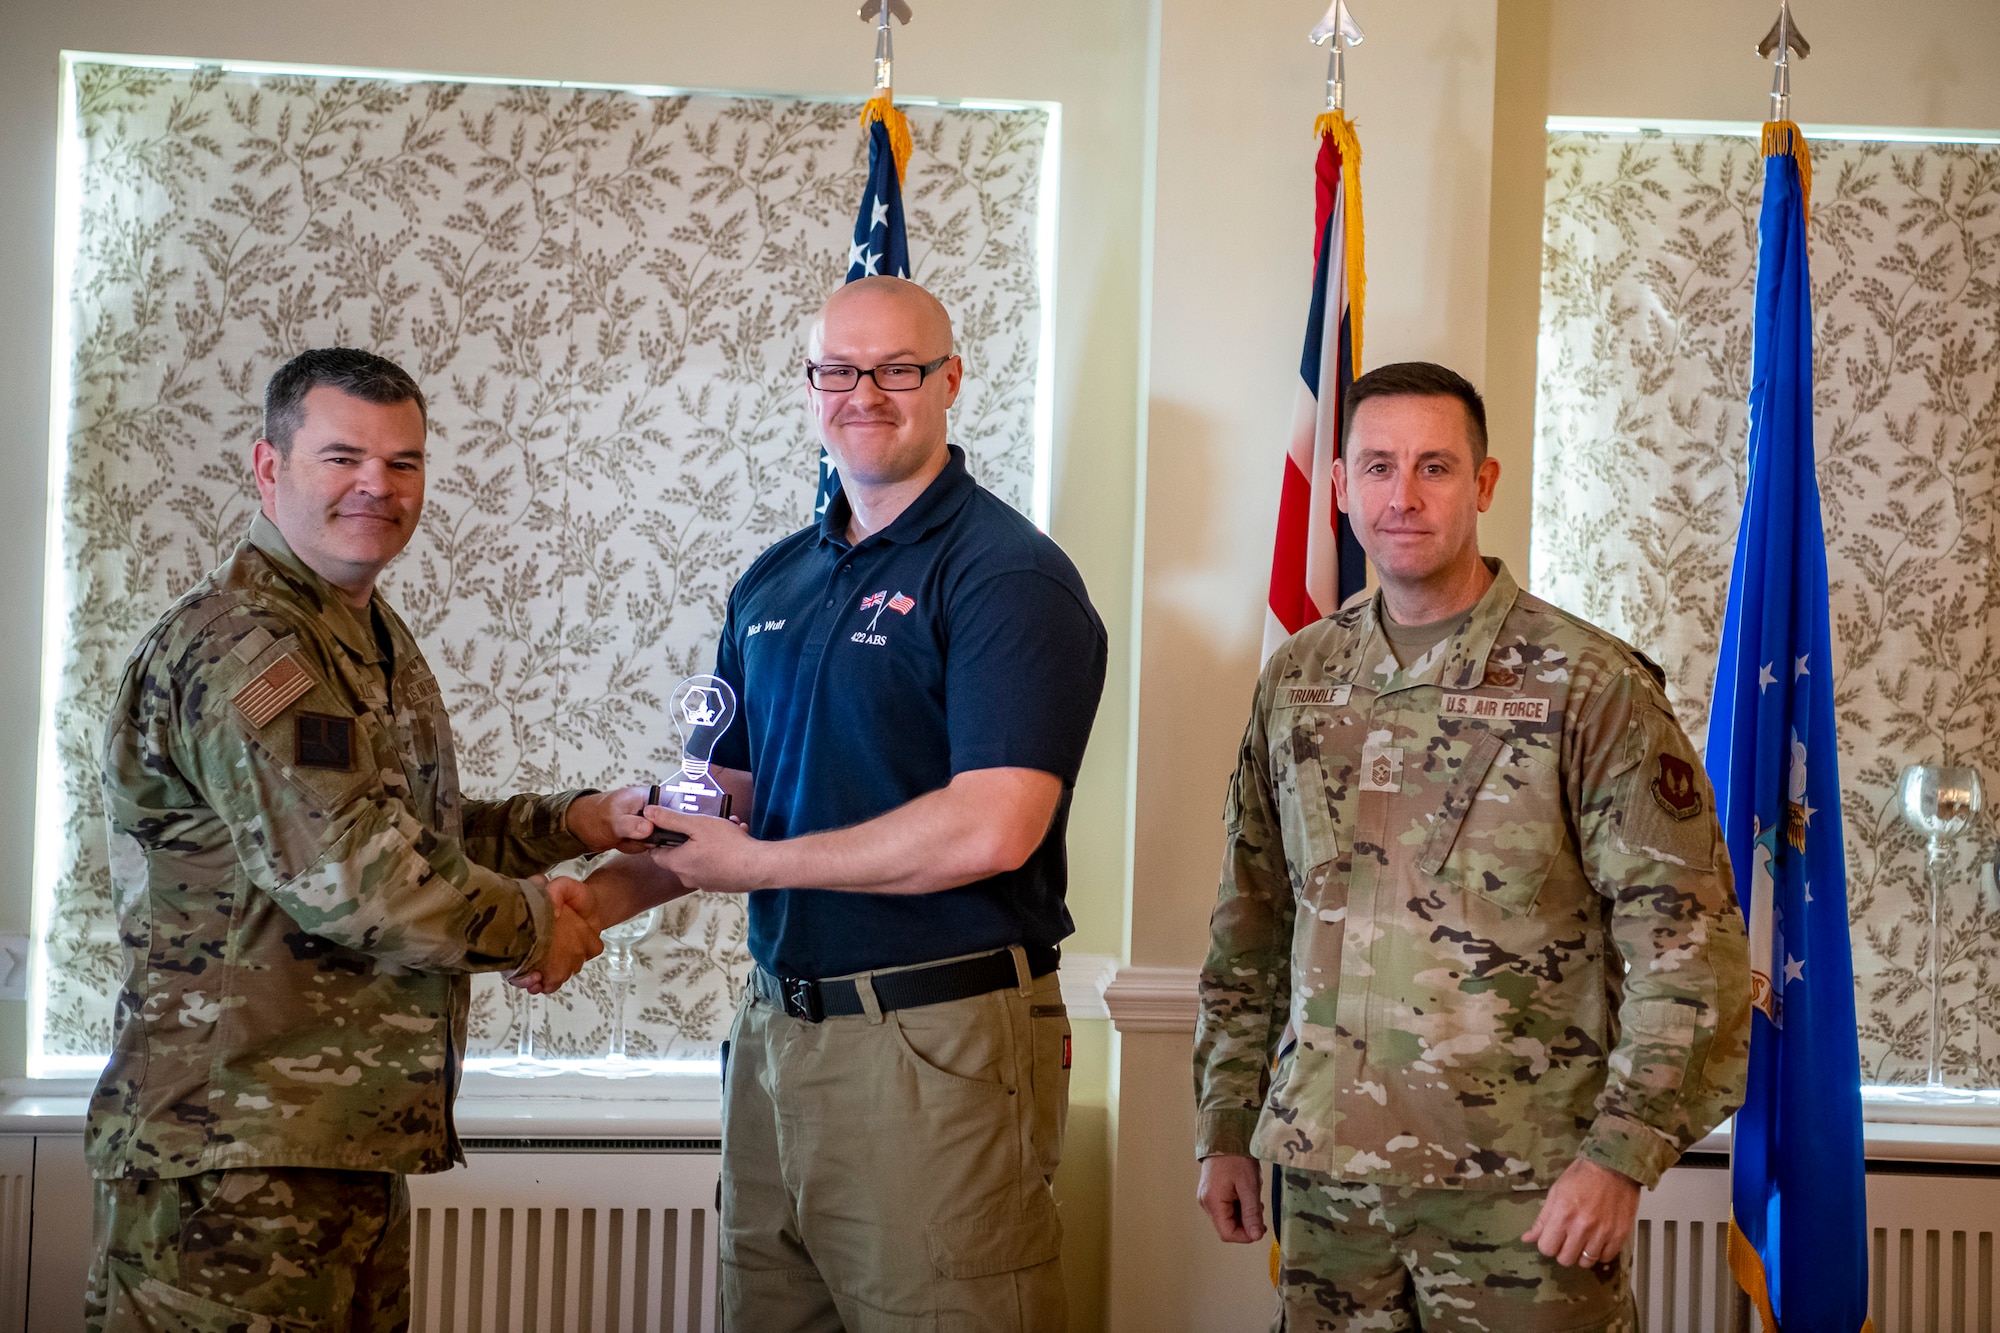 Nicholas Wulf, center, 422d Air Base Squadron supervisory logistics specialist, accepts an award from U.S. Air Force Col. Brian Filler, left, 501st Combat Support Wing commander and Chief Master Sgt. Joshua Trundle, 501st CSW command chief, during the Pathfinder Innovation Conference at RAF Alconbury, England, Oct. 21, 2022. The conference gave participants an opportunity to pitch their innovations, which were evaluated by a panel of judges and ranked based on their feasibility and overall benefit to the 501st Combat Support Wing mission. (U.S Air Force photo by Staff Sgt. Eugene Oliver)